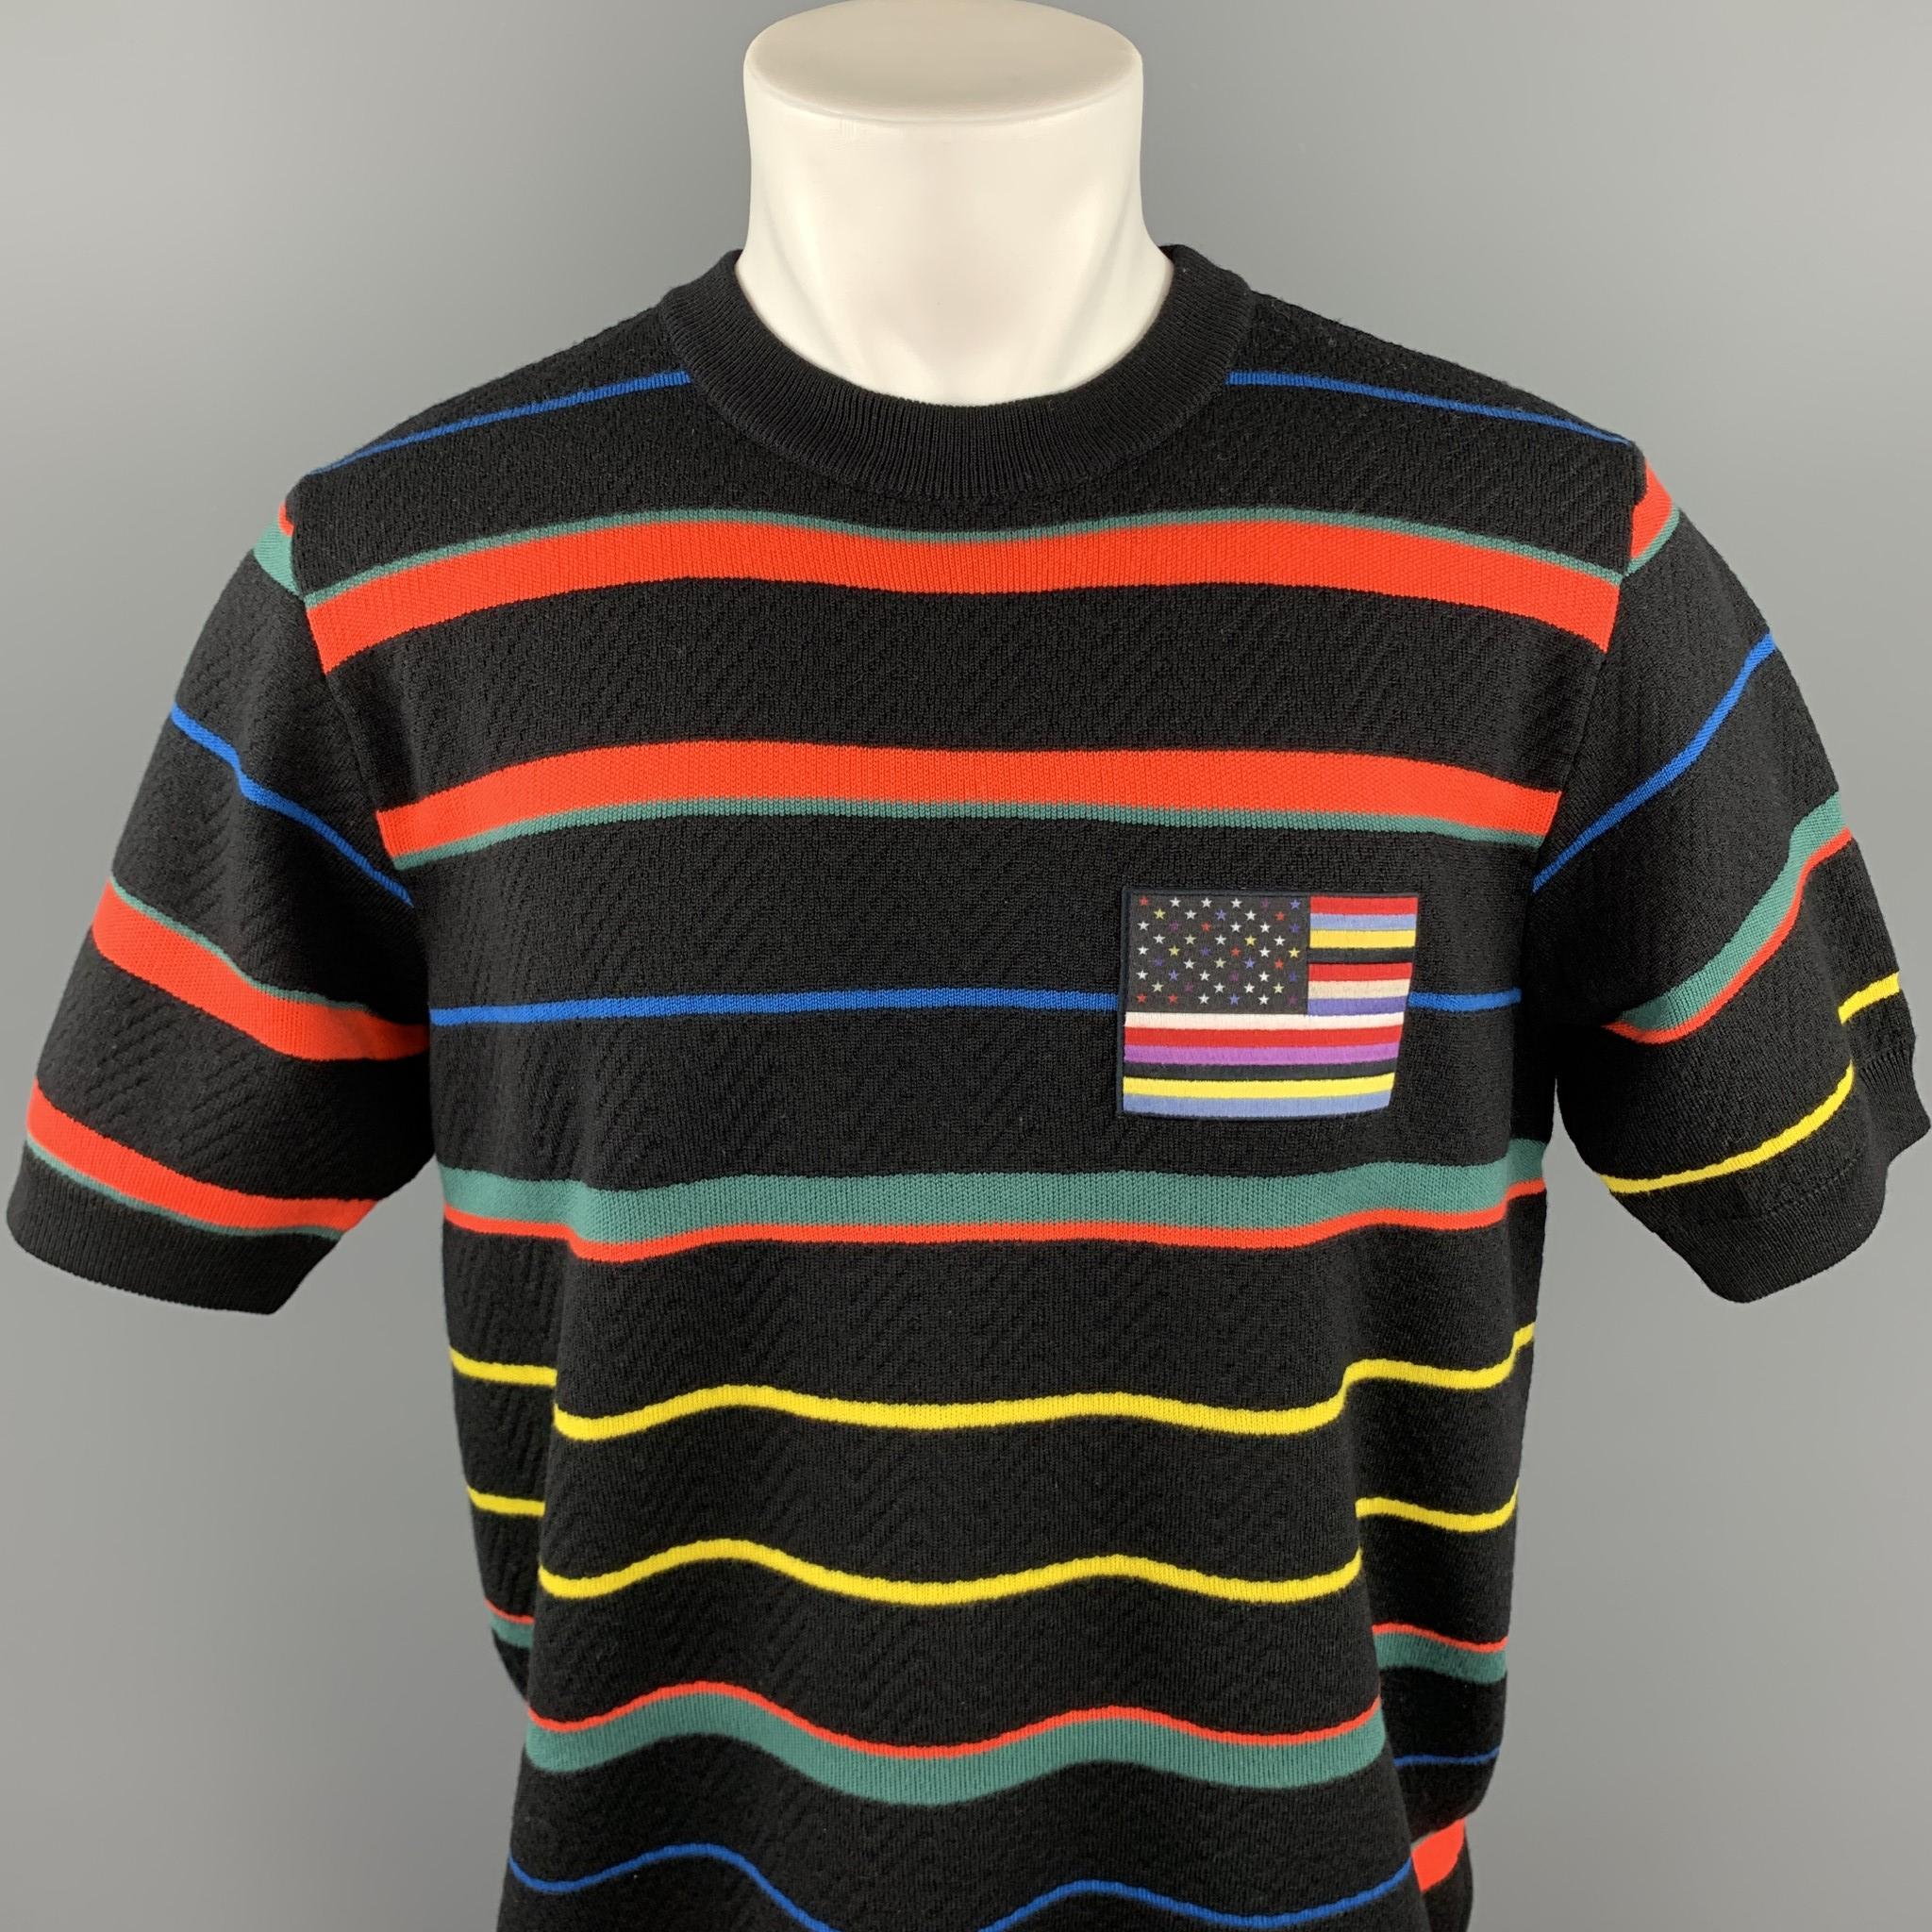 GIVENCHY short sleeve pullover comes in a black wool with a multi-color stripe print featuring a embroidered flag and a crew-neck. Made in Italy.

Excellent Pre-Owned Condition.
Marked: M

Measurements:

Shoulder: 18 in. 
Chest: 42 in. 
Sleeve: 11